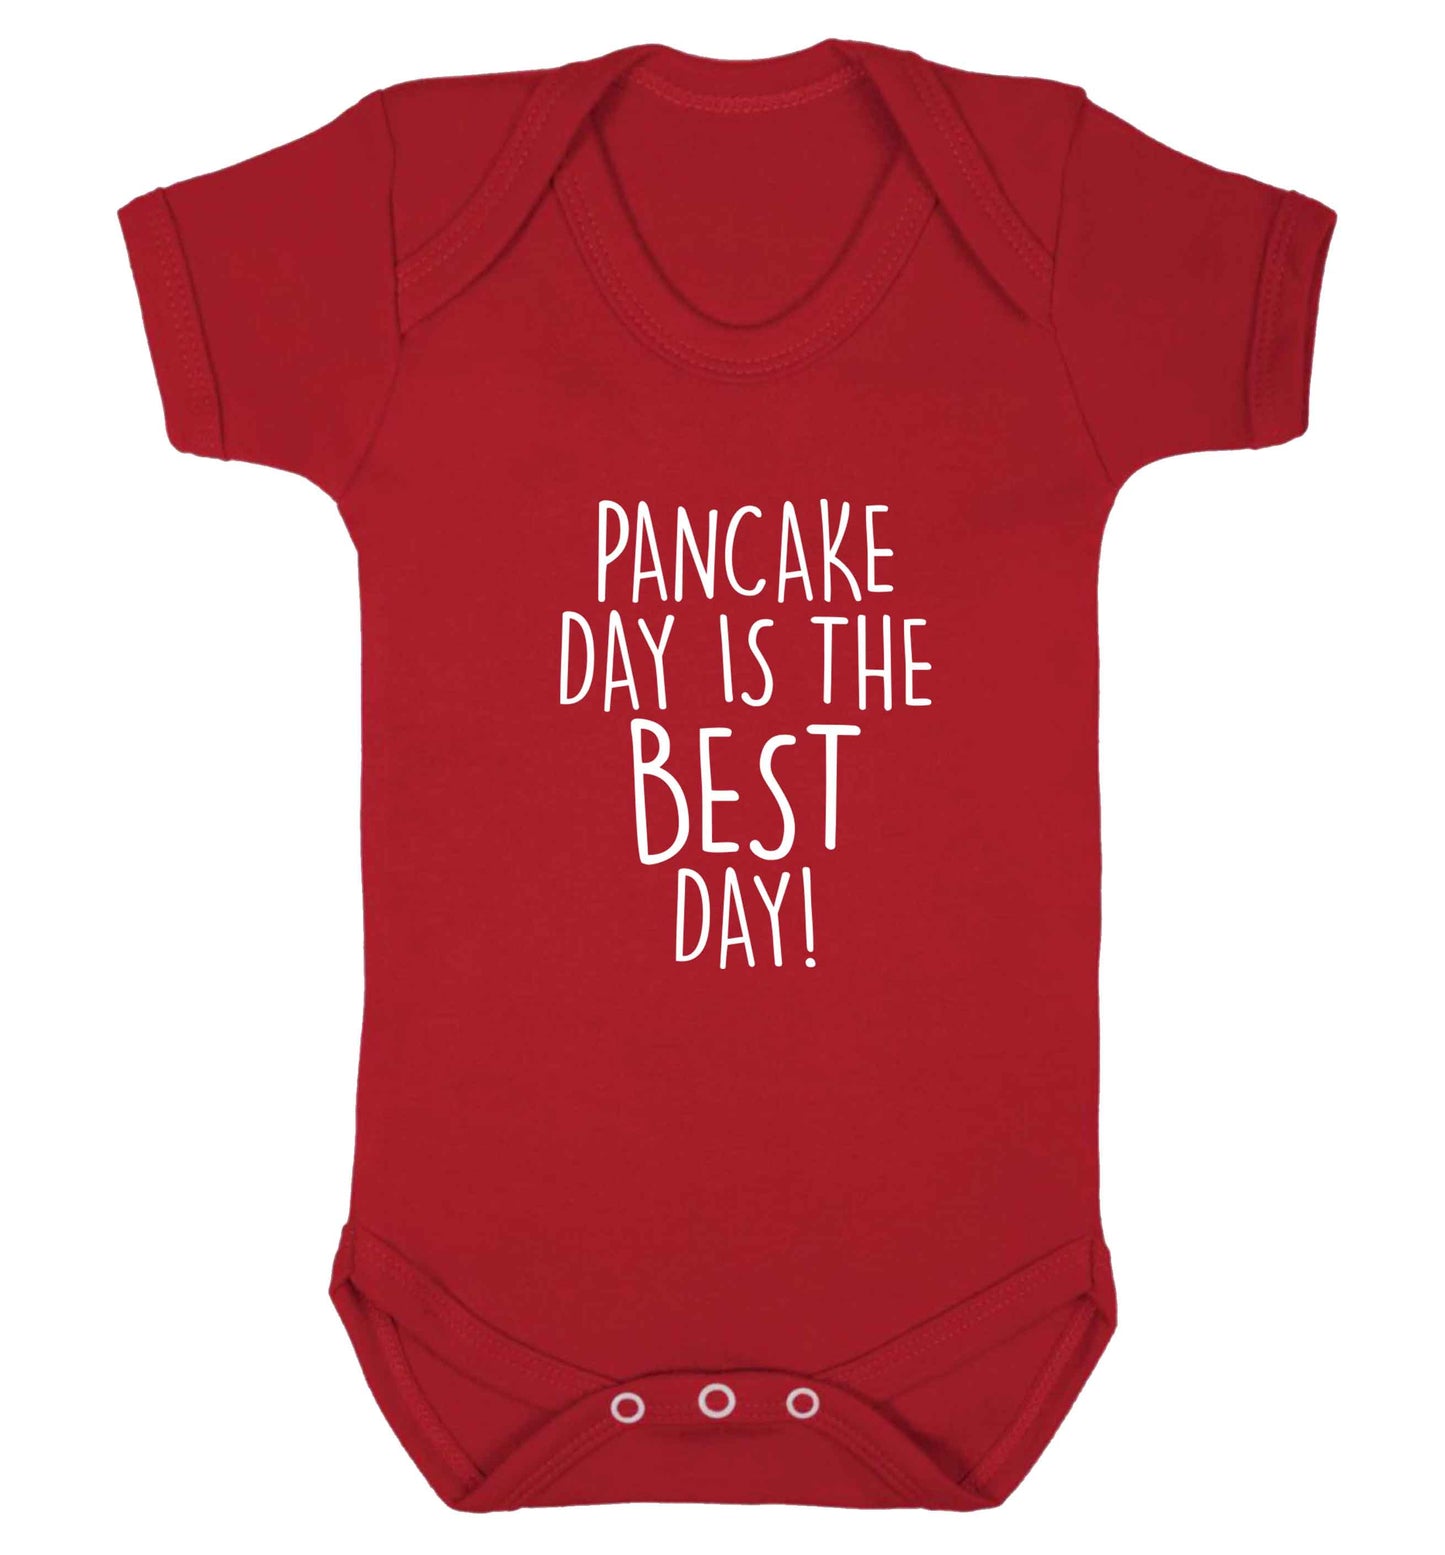 Pancake day is the best day baby vest red 18-24 months